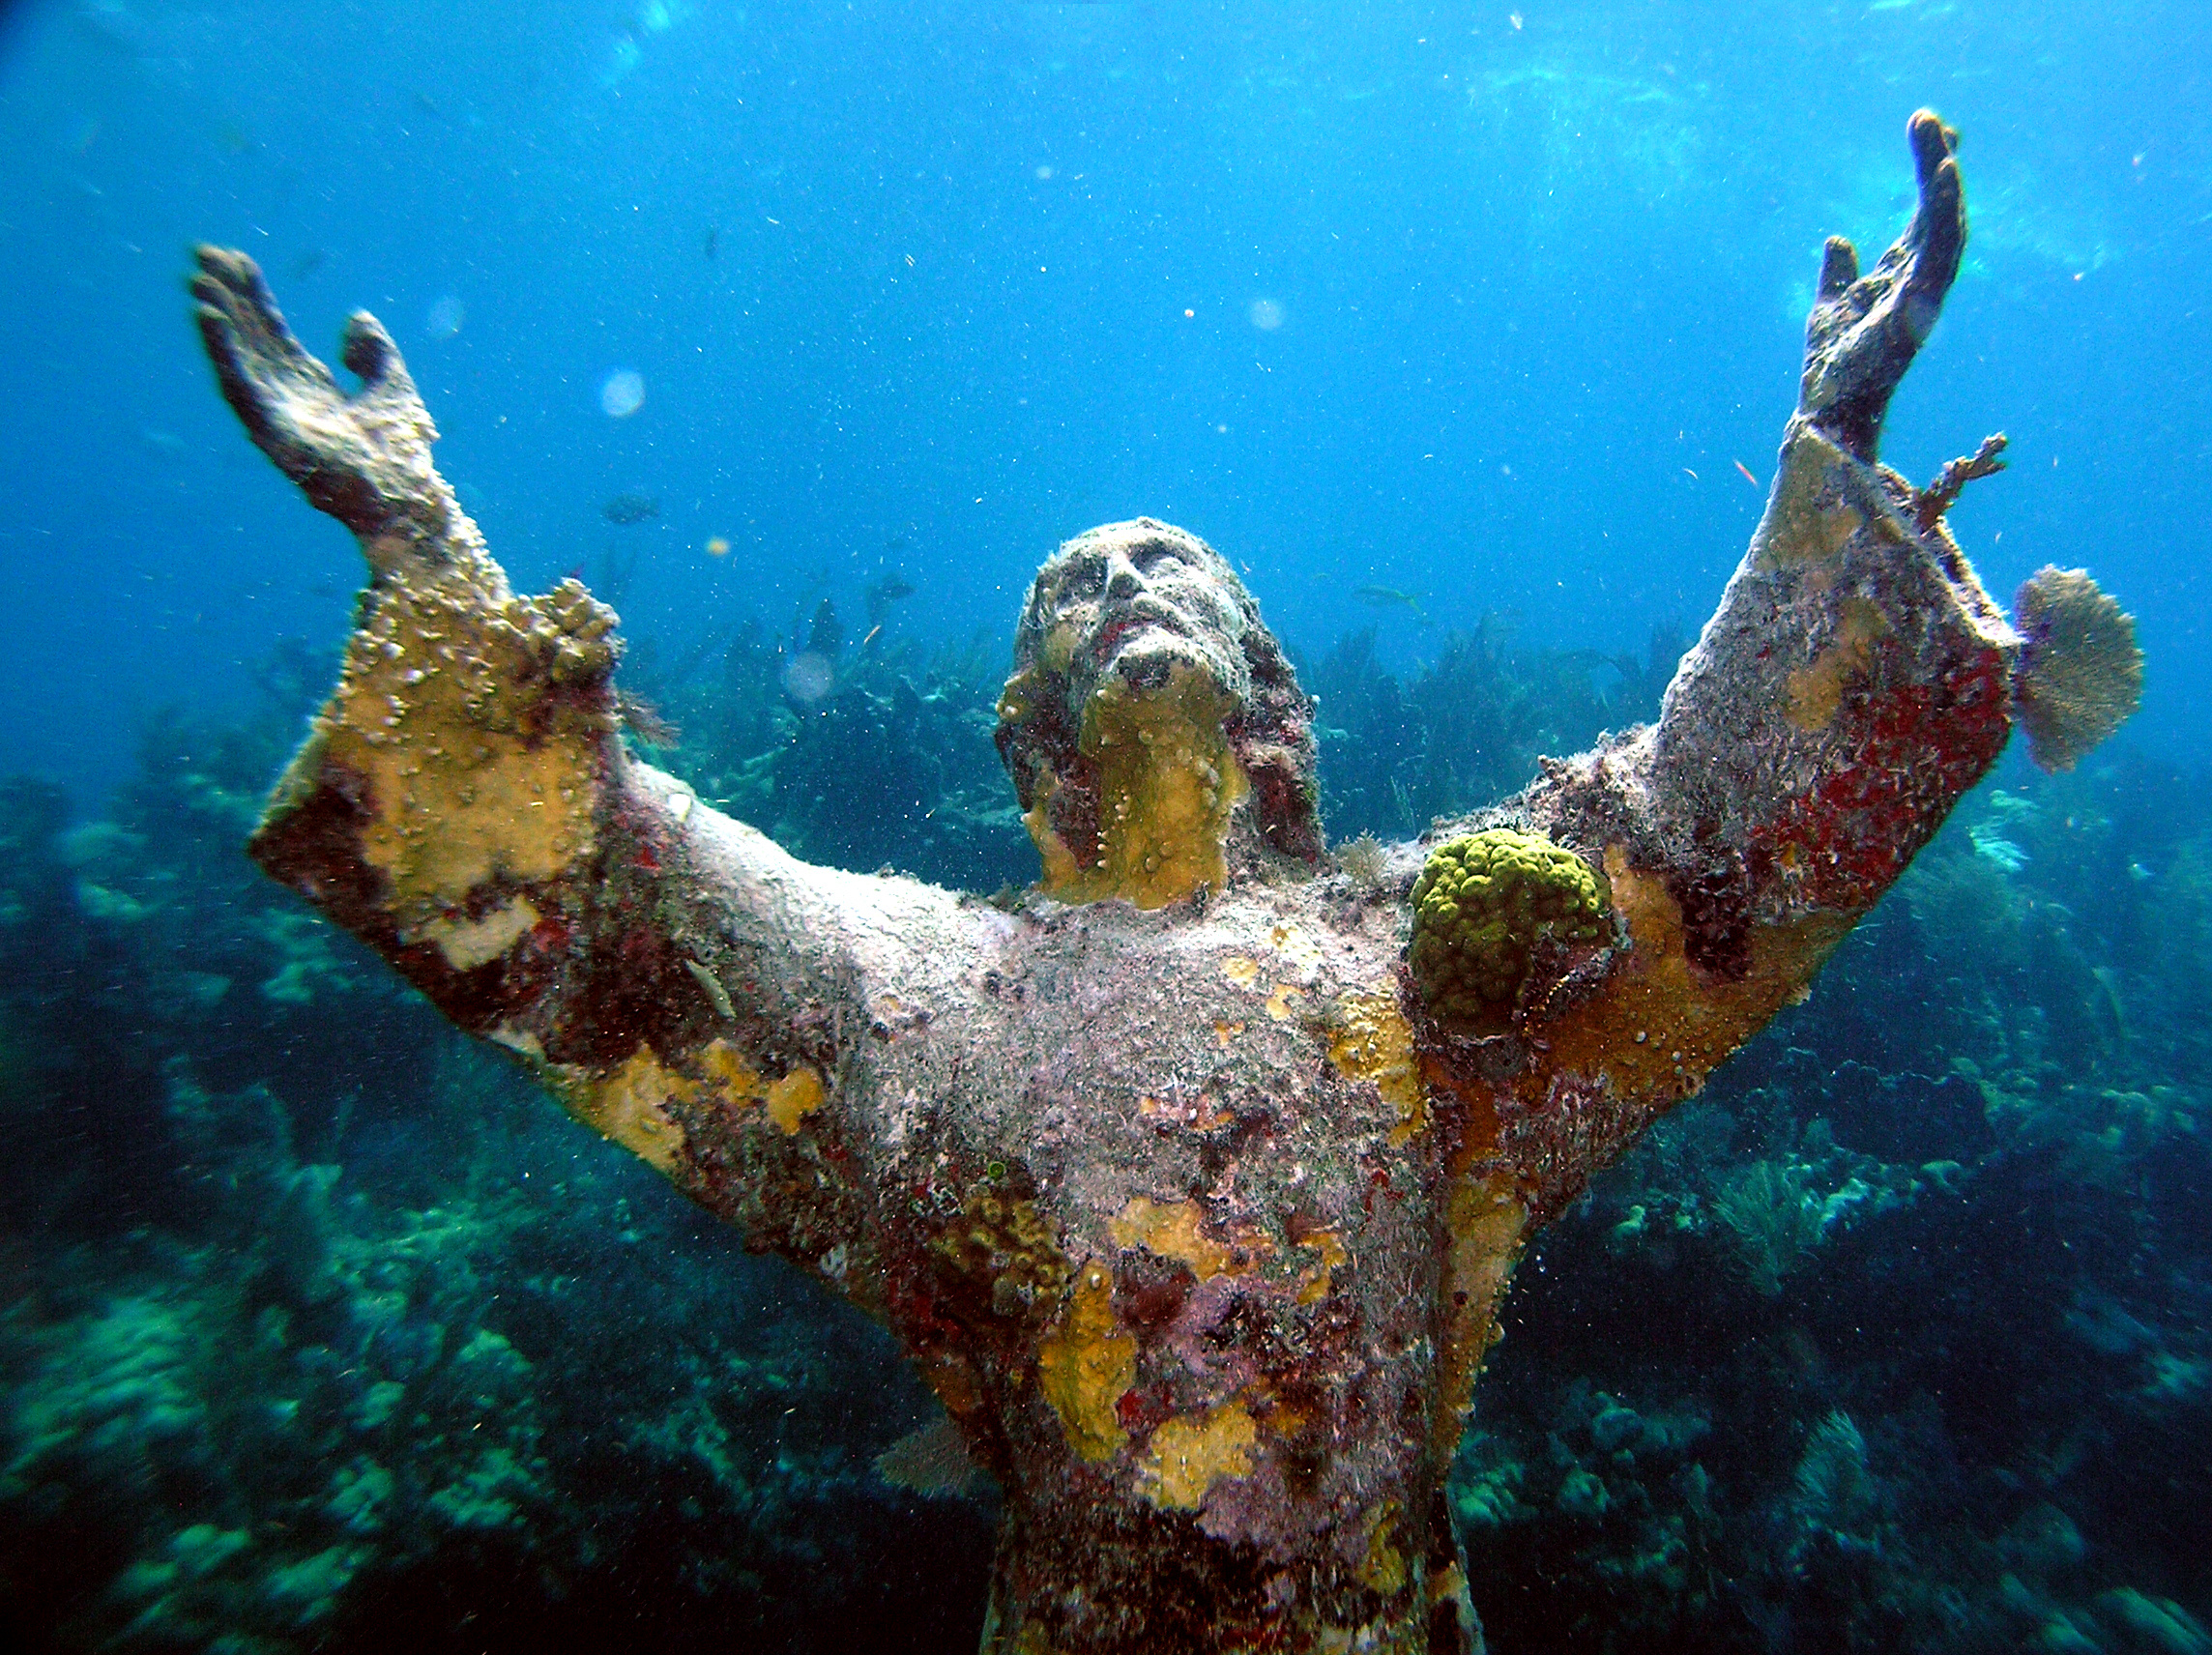 The christ of the abyss underwater sculpture in Key Largo, Florida provides protection for local marine life allowing them the ability to flourish